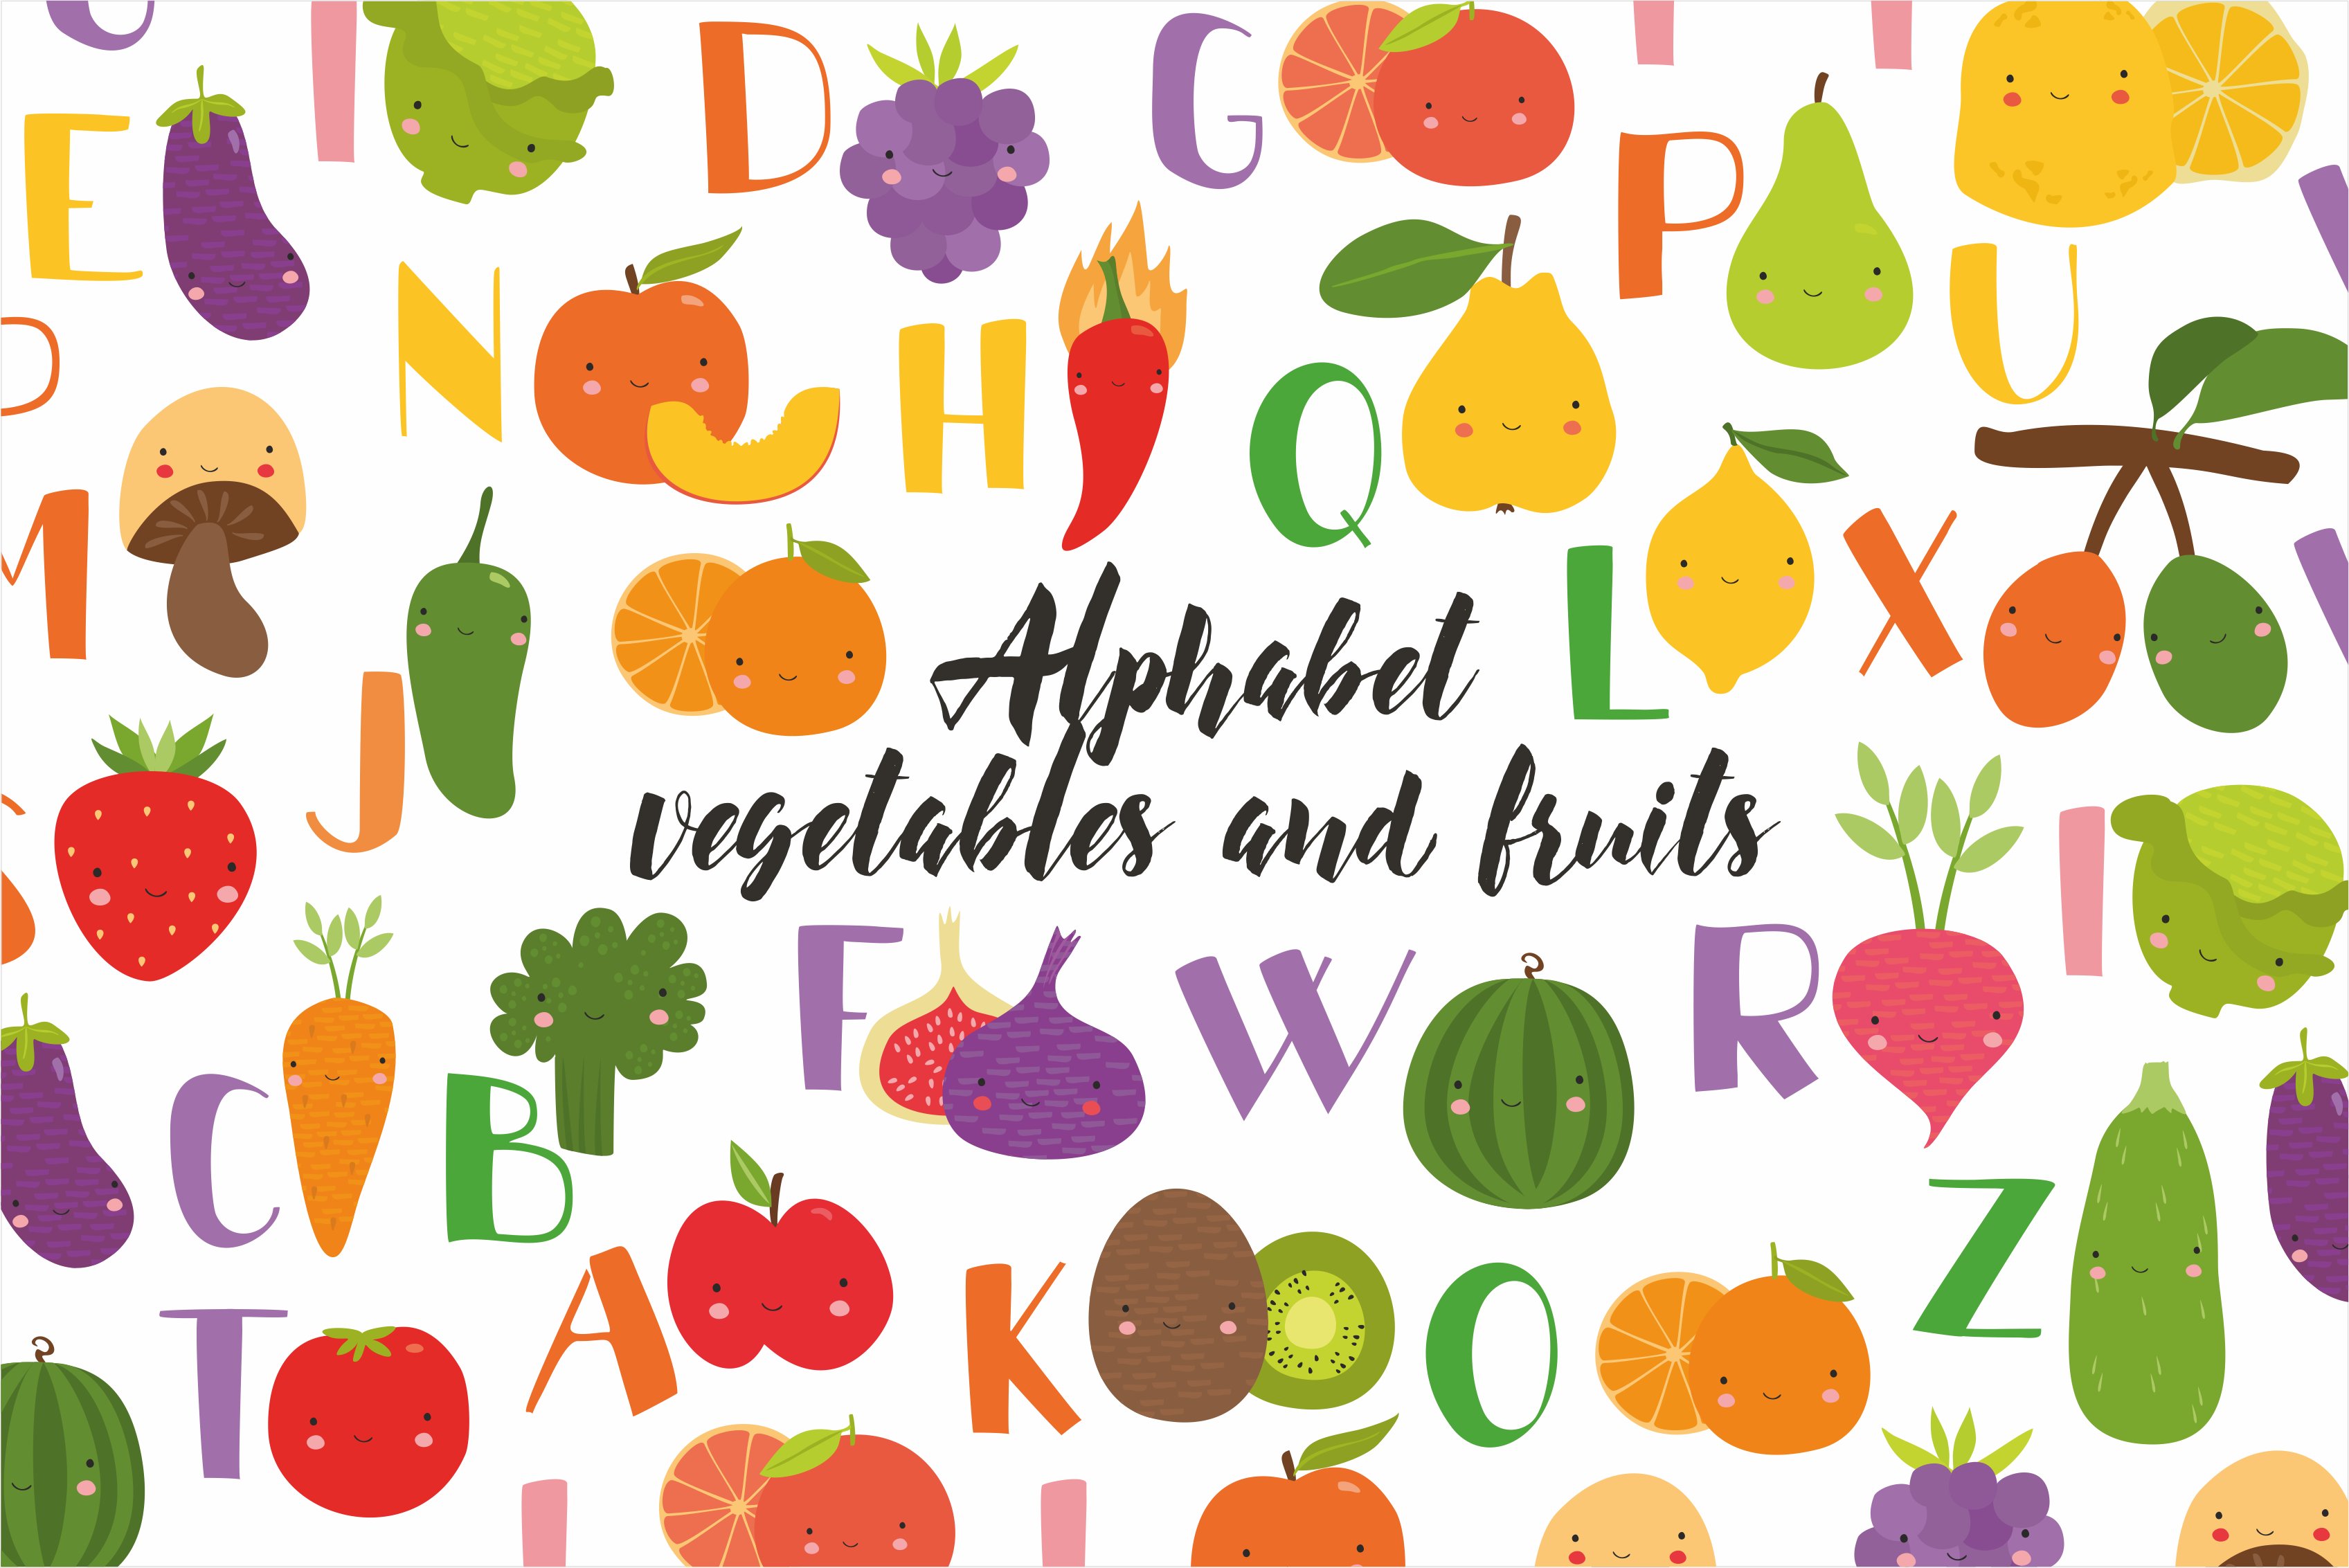 Alphabet vegetables and fruits kids cover image.